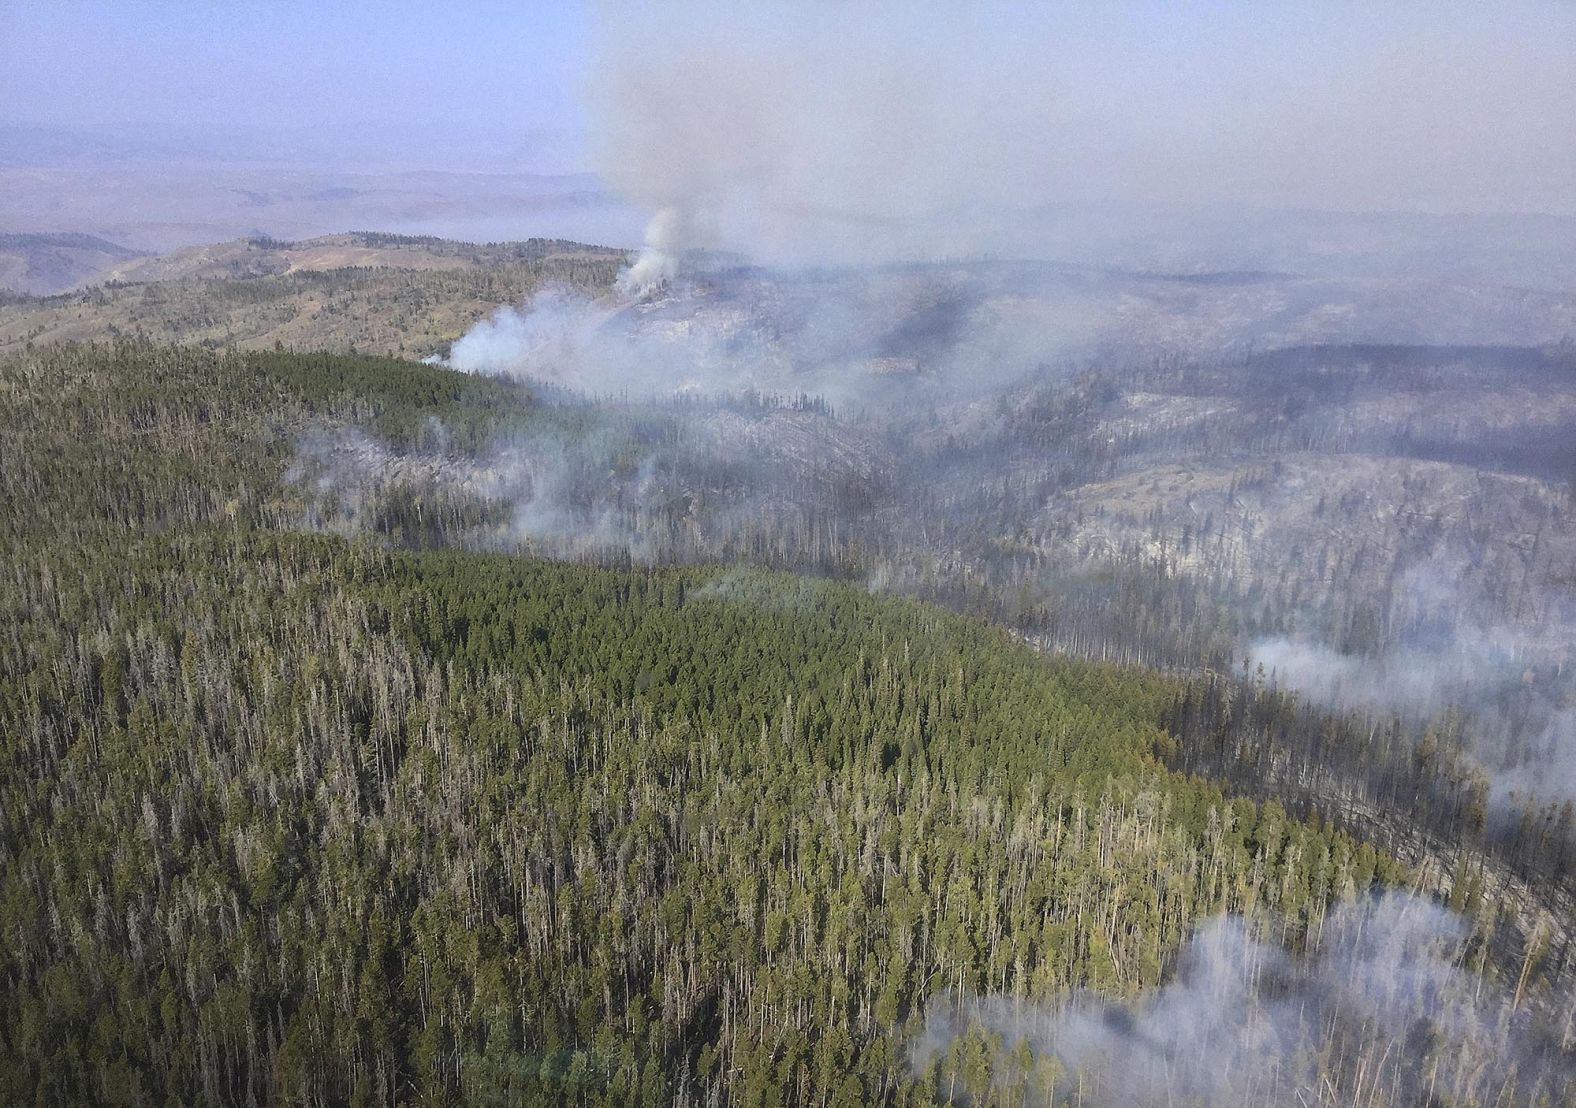 Wildfire smoke rises in Medicine Bow National Forest in southeastern Wyoming on September 21, 2020.